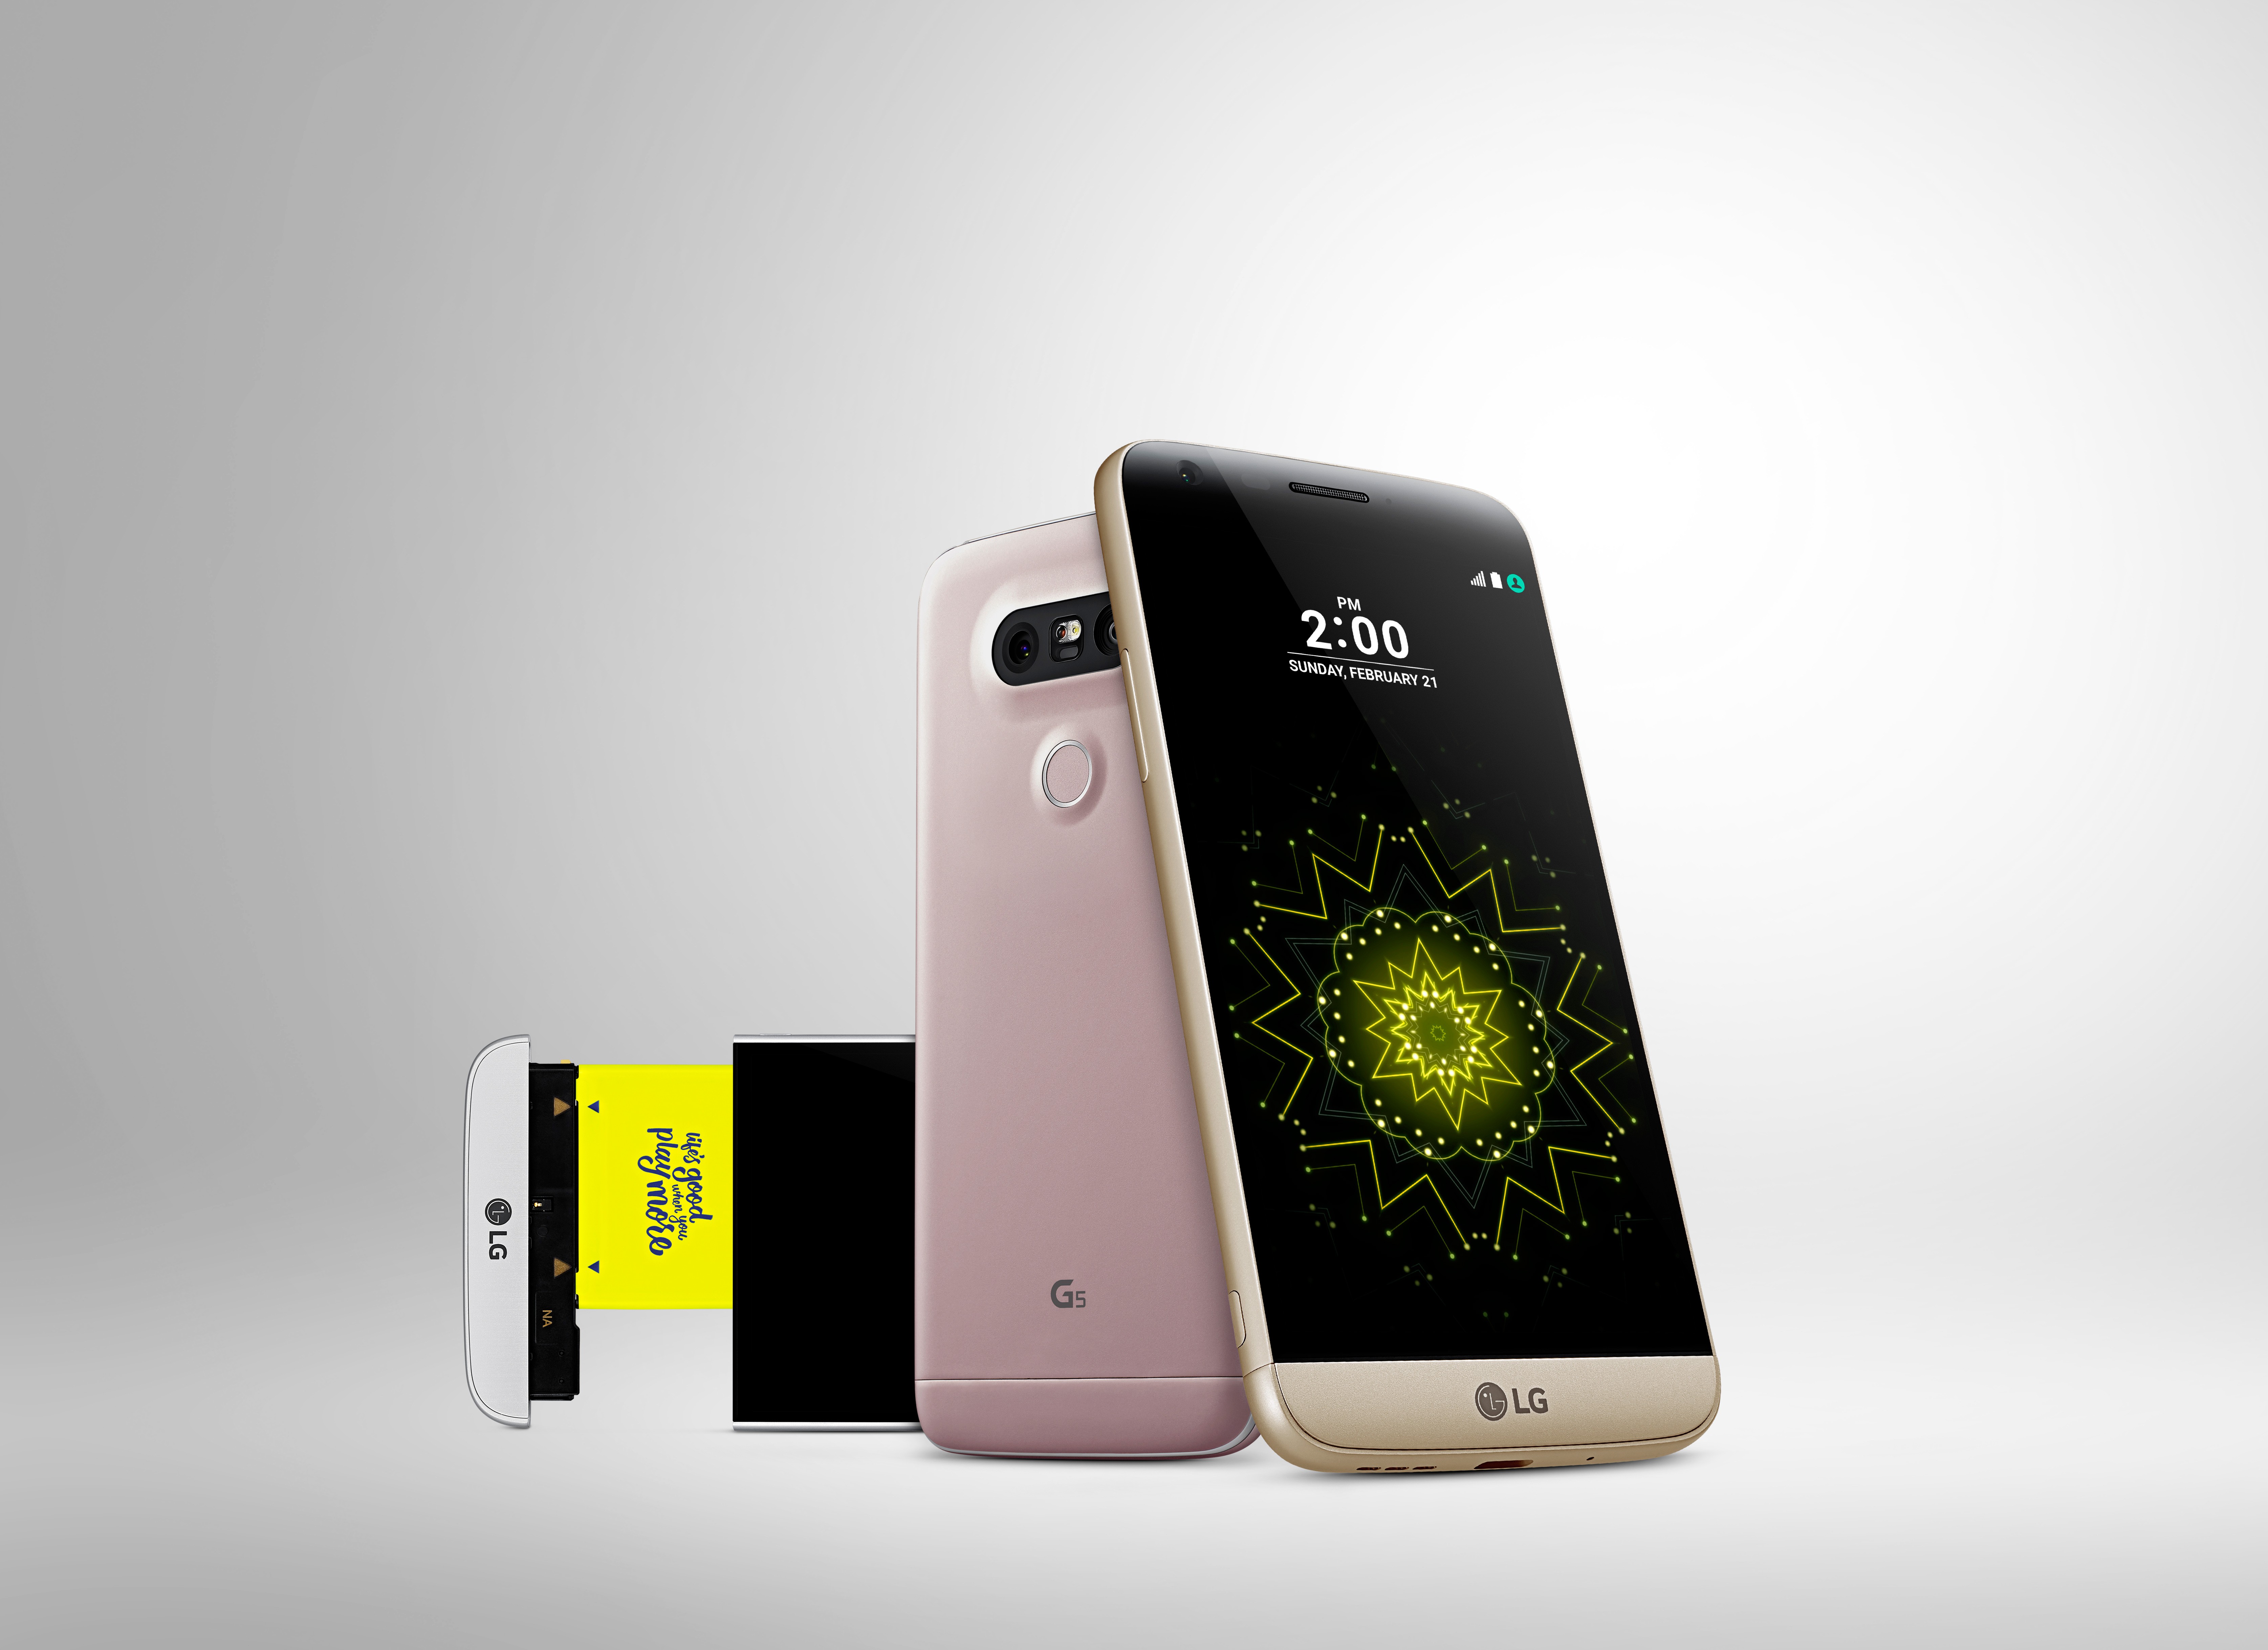 LG G5 and Stylus 2 Plus are now official in Malaysia